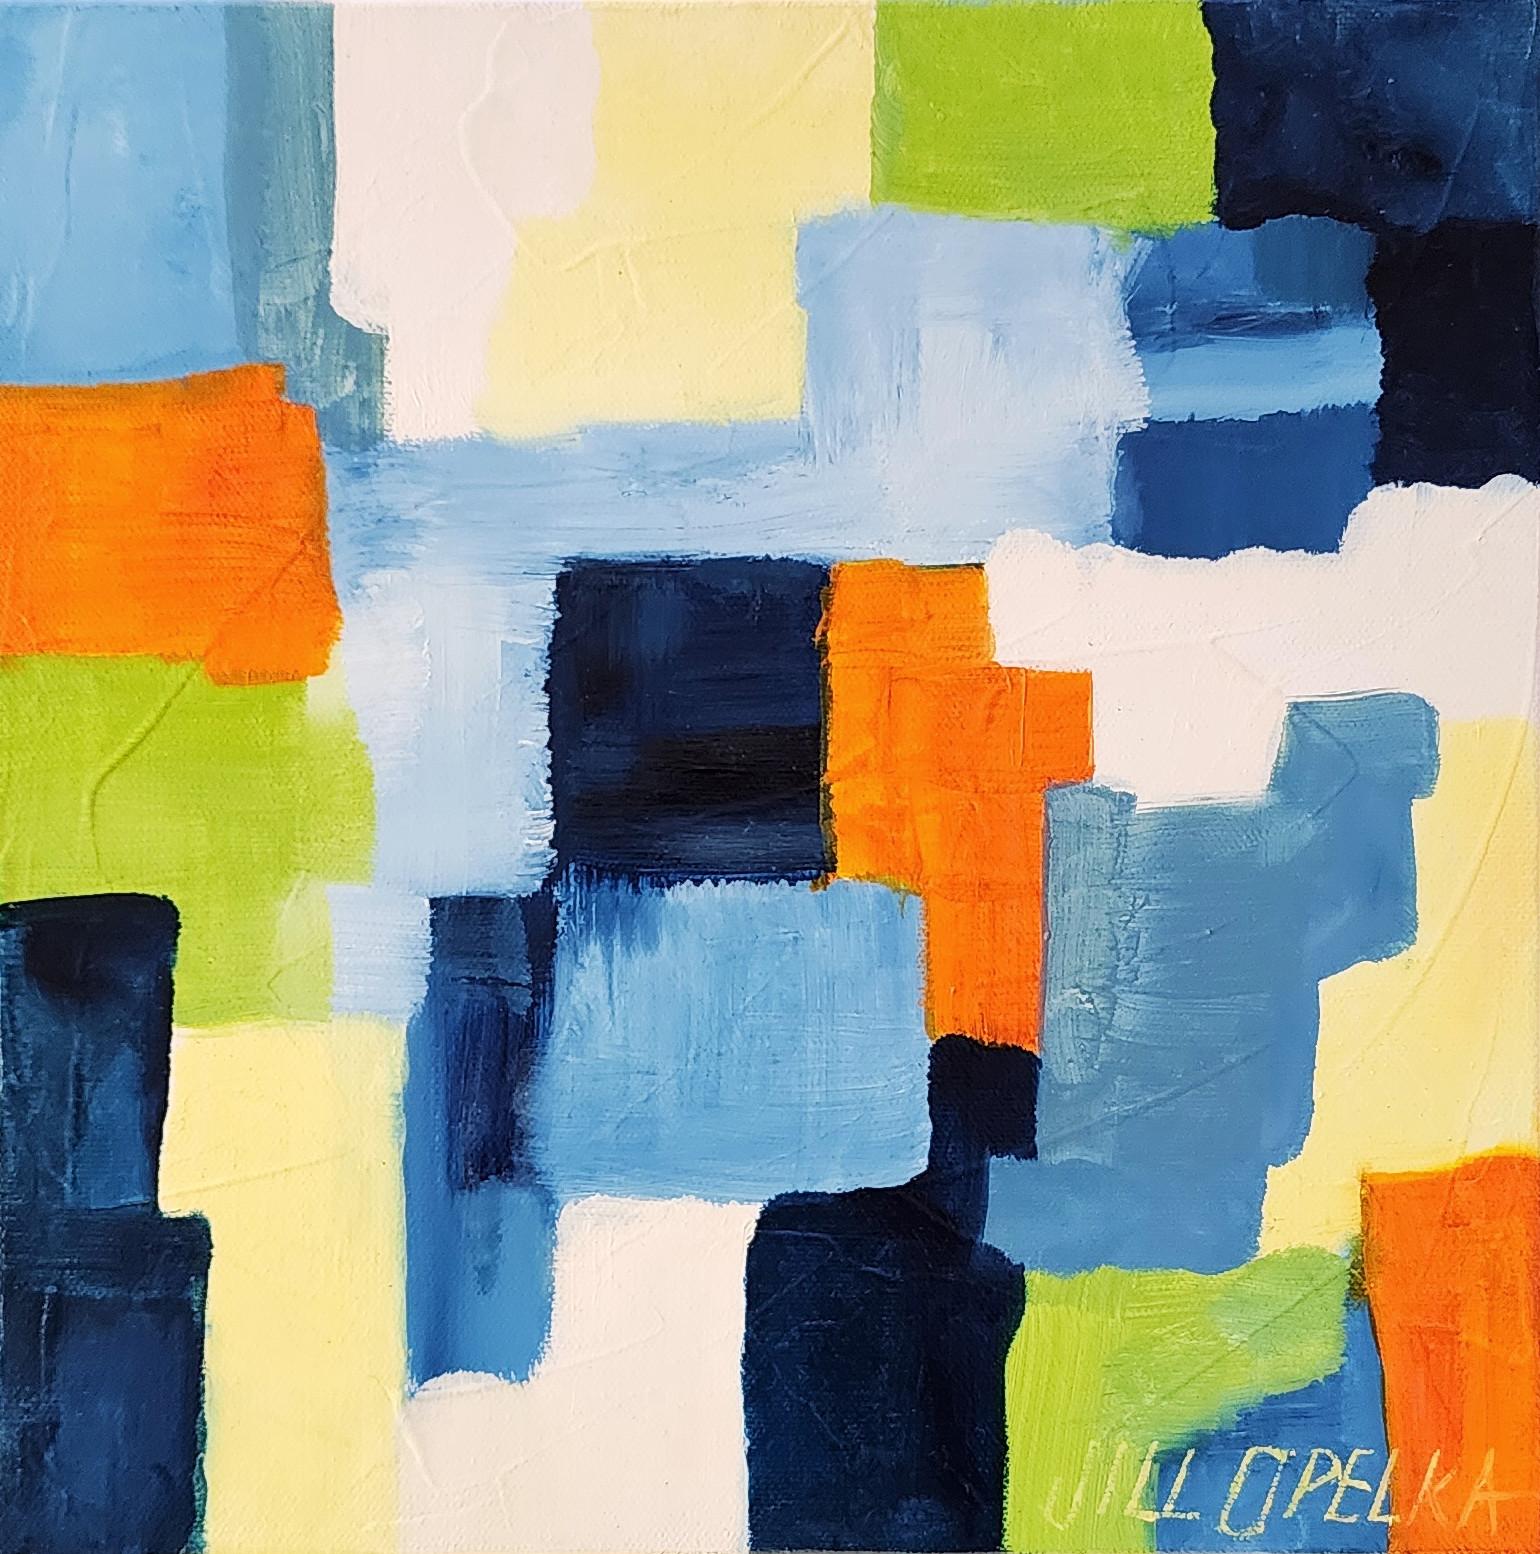 Abstract II (Abstract, Vibrant, Deep, Blue, Navy, Green, Orange, 25% OFF) - Painting by Jill Opelka